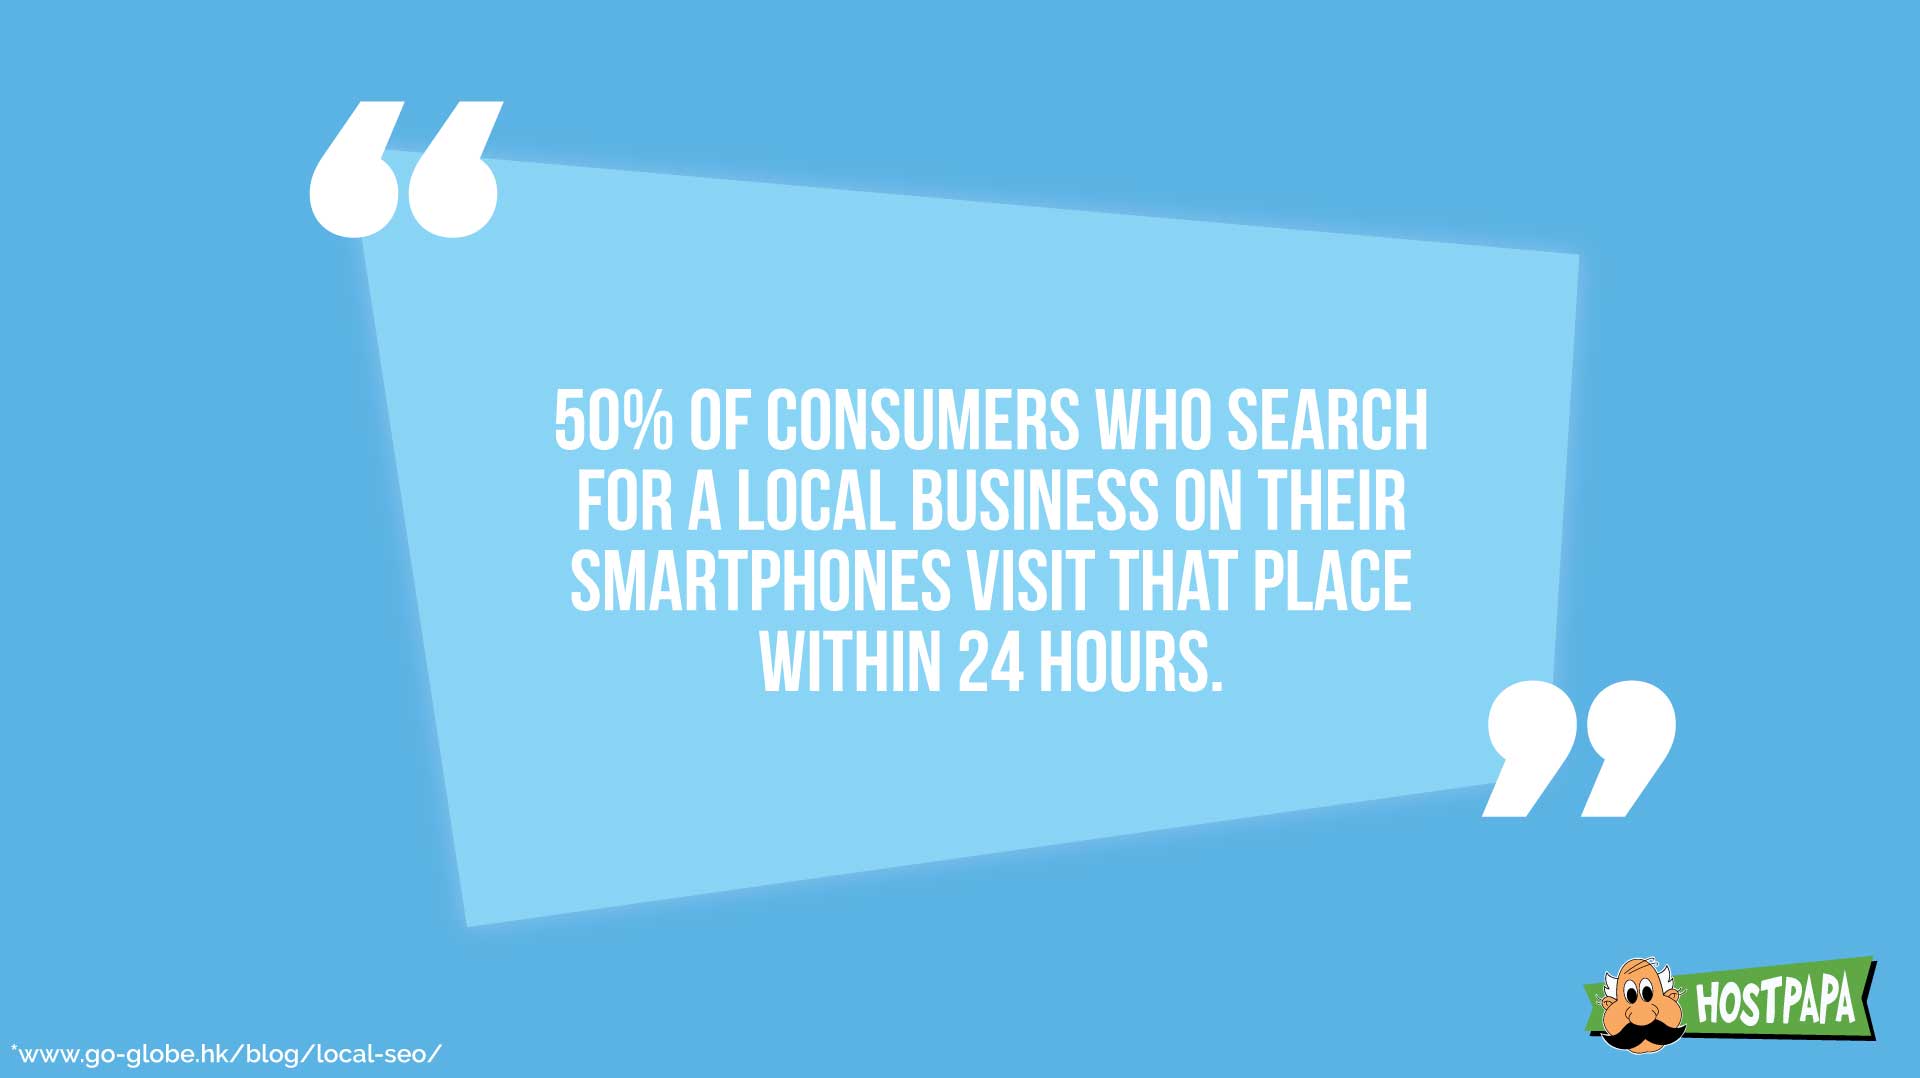 Customers that search a local business through their smartphones, visit that place within 24 hrs